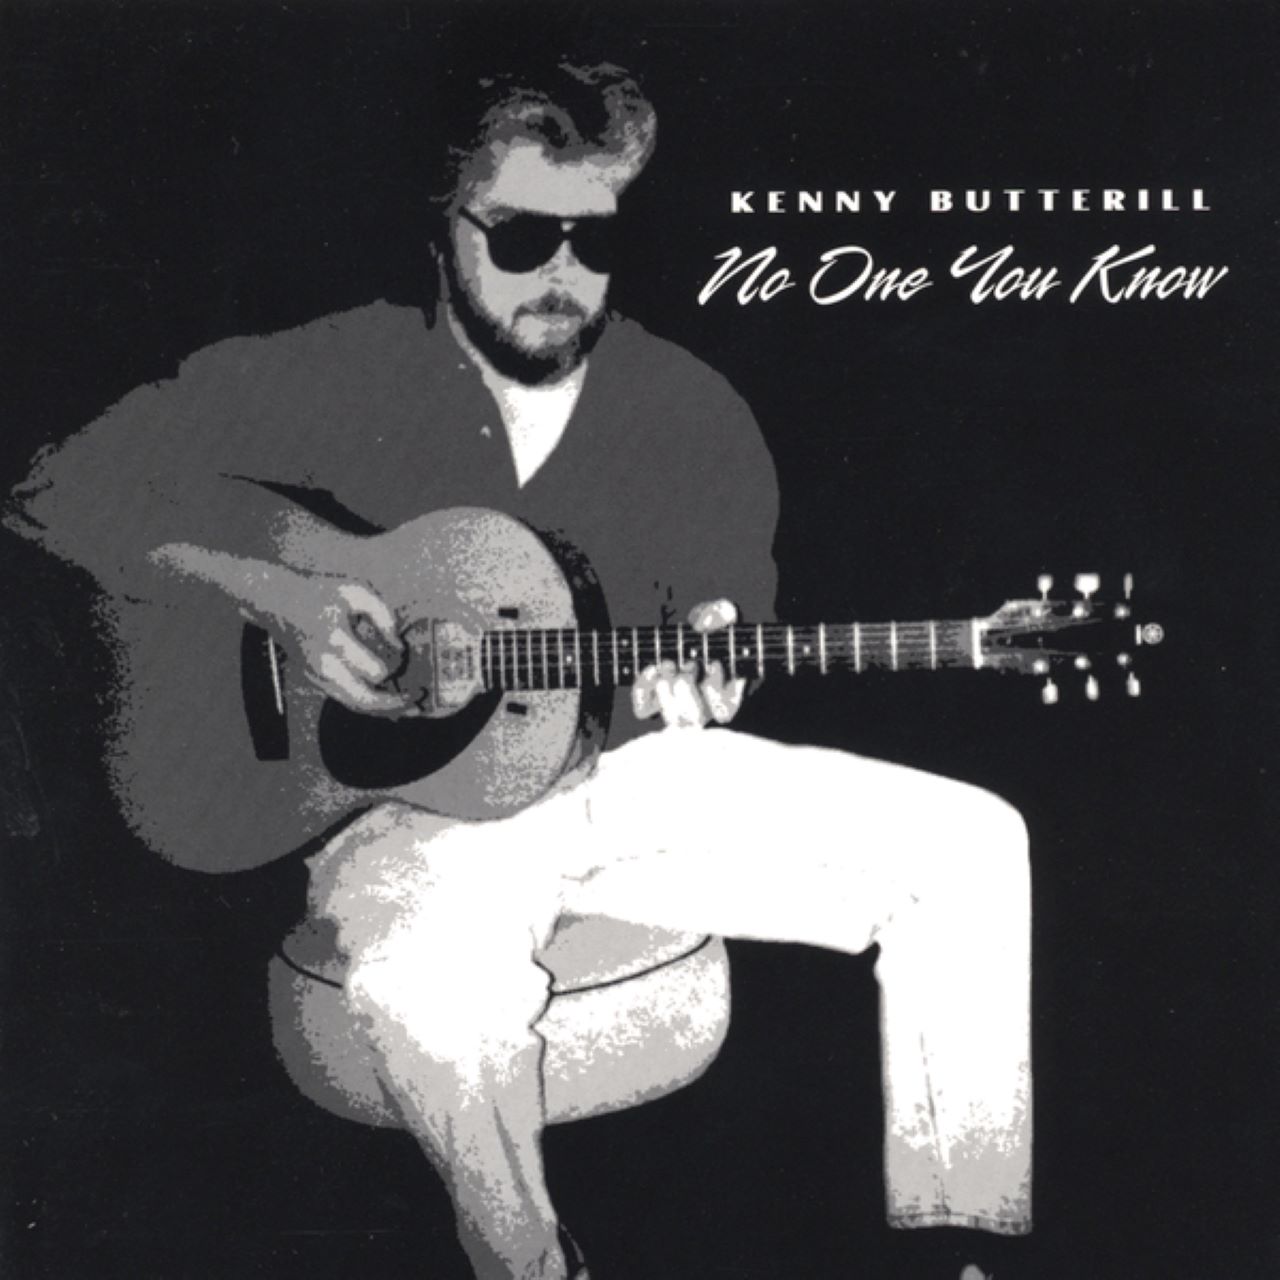 Kenny Butterill - No One You Know cover album